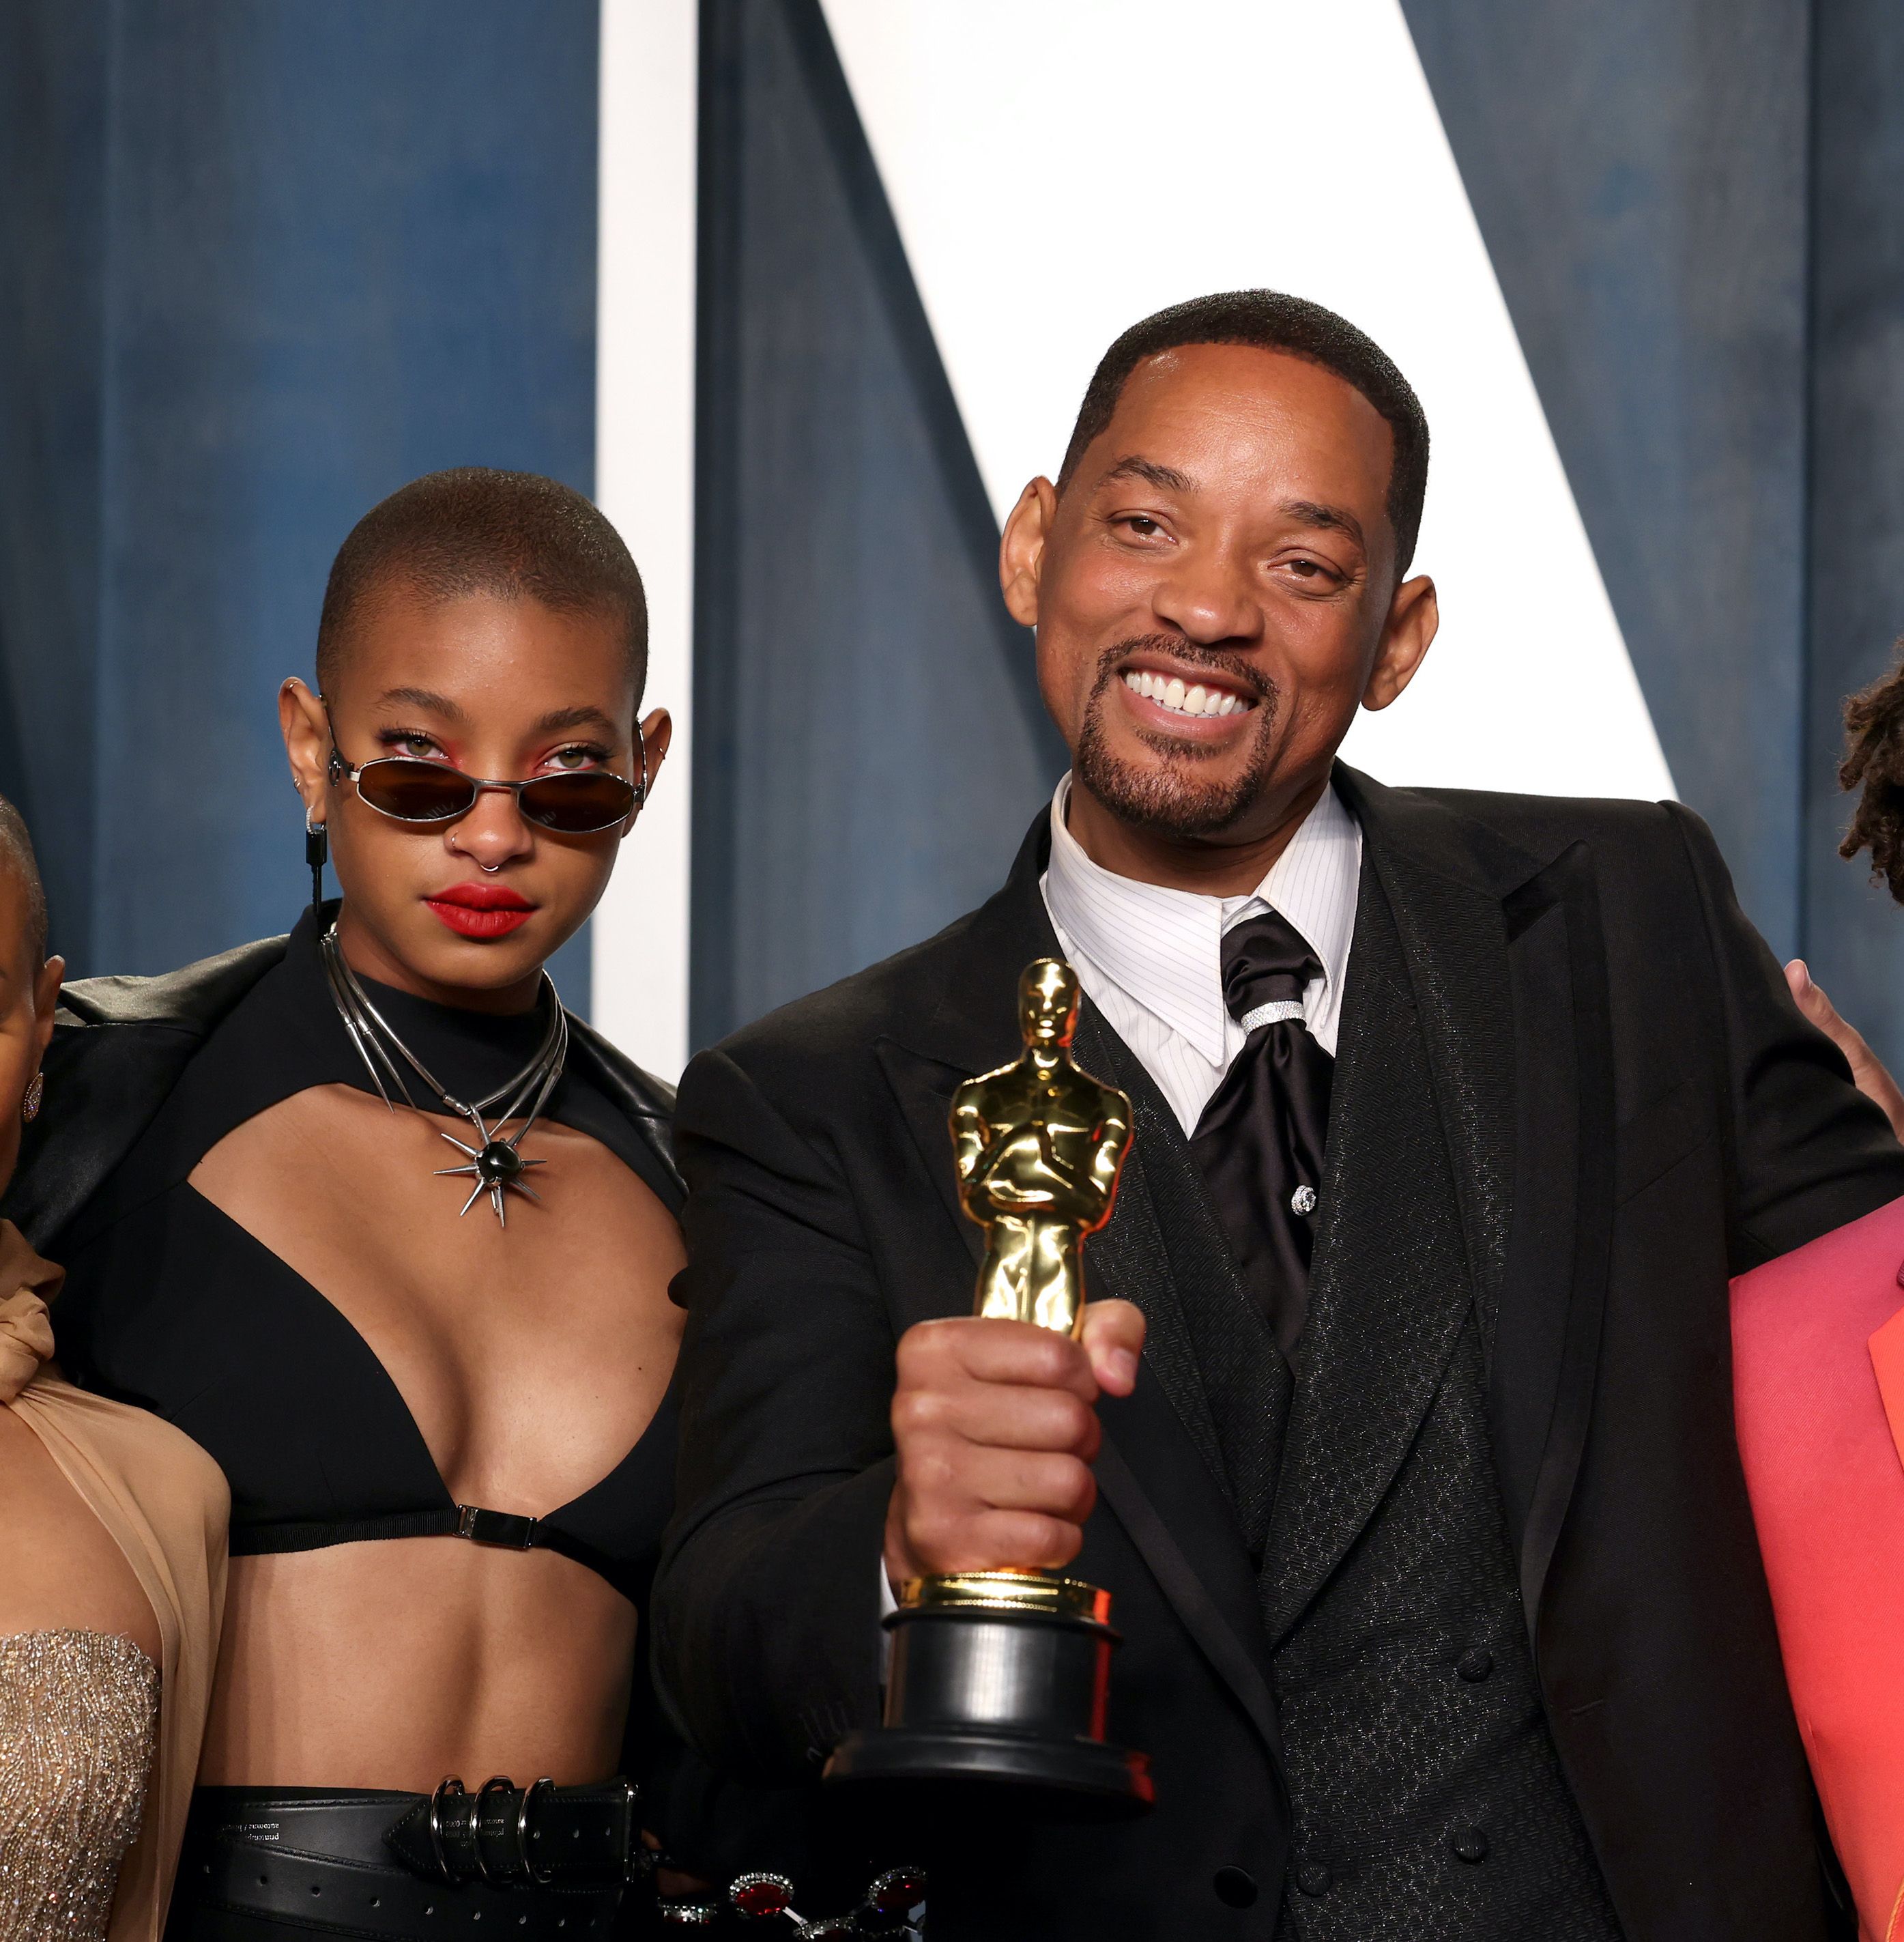 Willow Smith weighs in on her dad, Will Smith, slapping Chris Rock at the Oscars